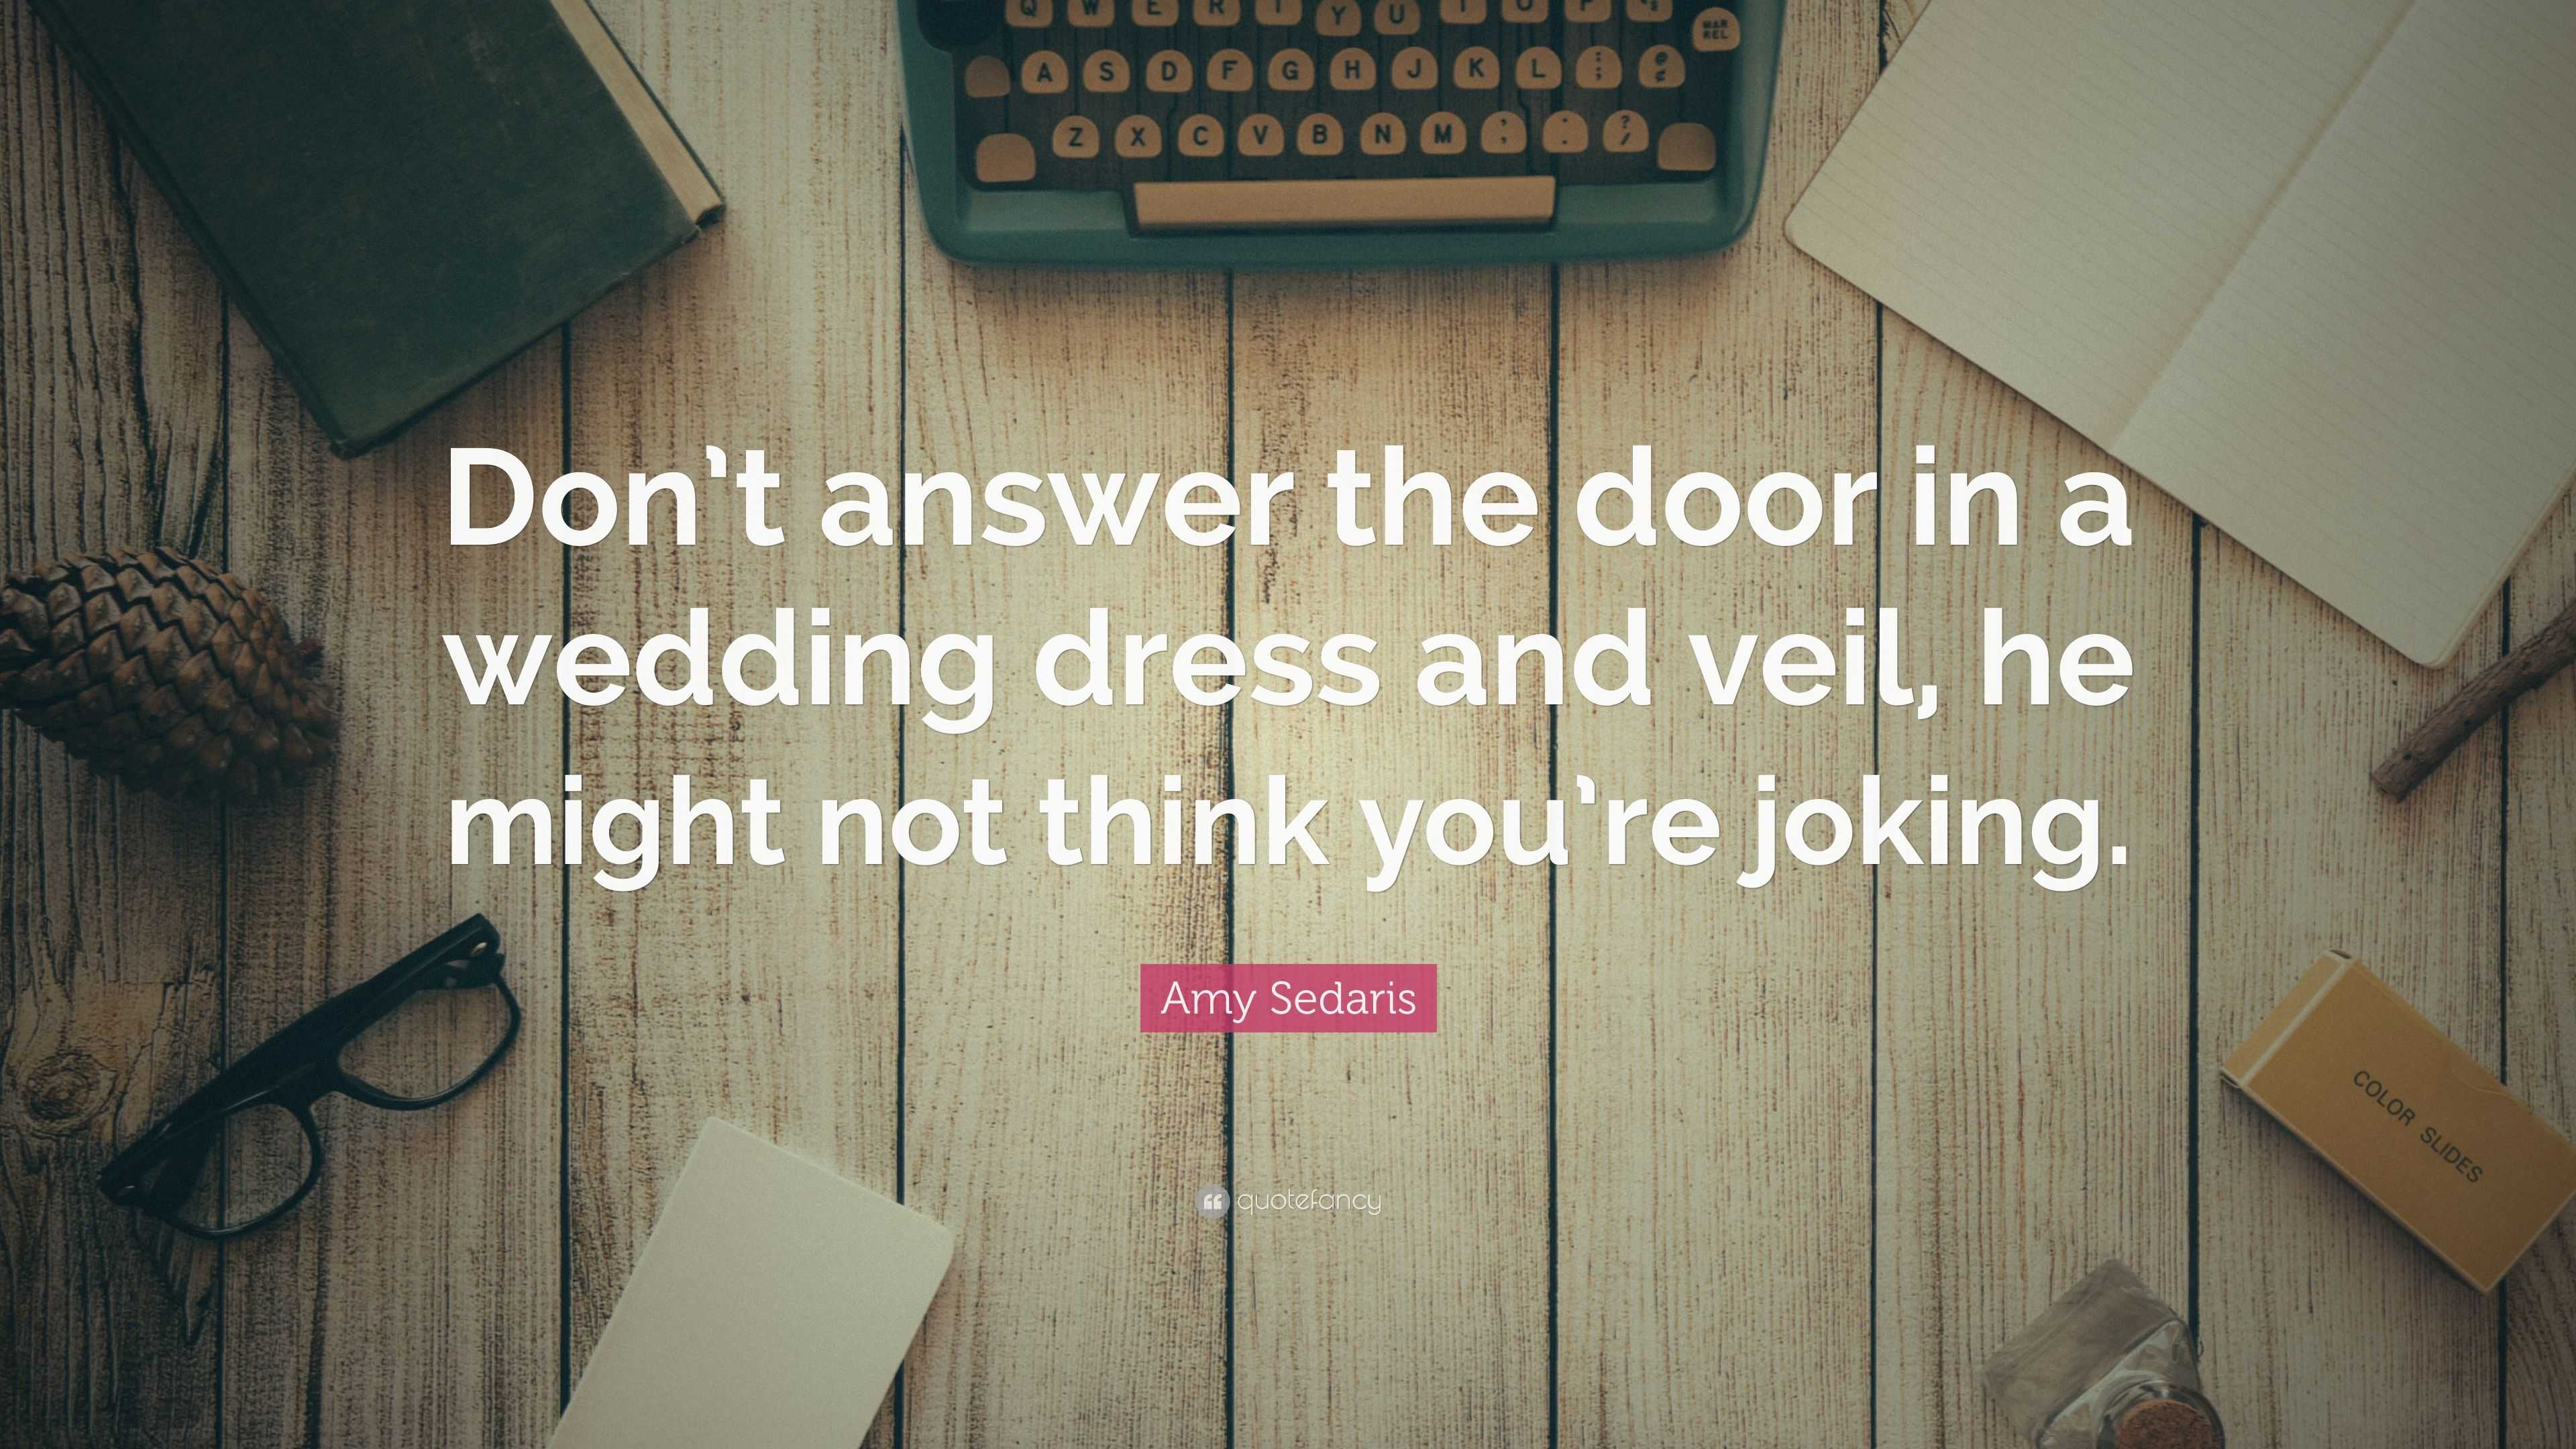 5688203 Amy Sedaris Quote Don t answer the door in a wedding dress and